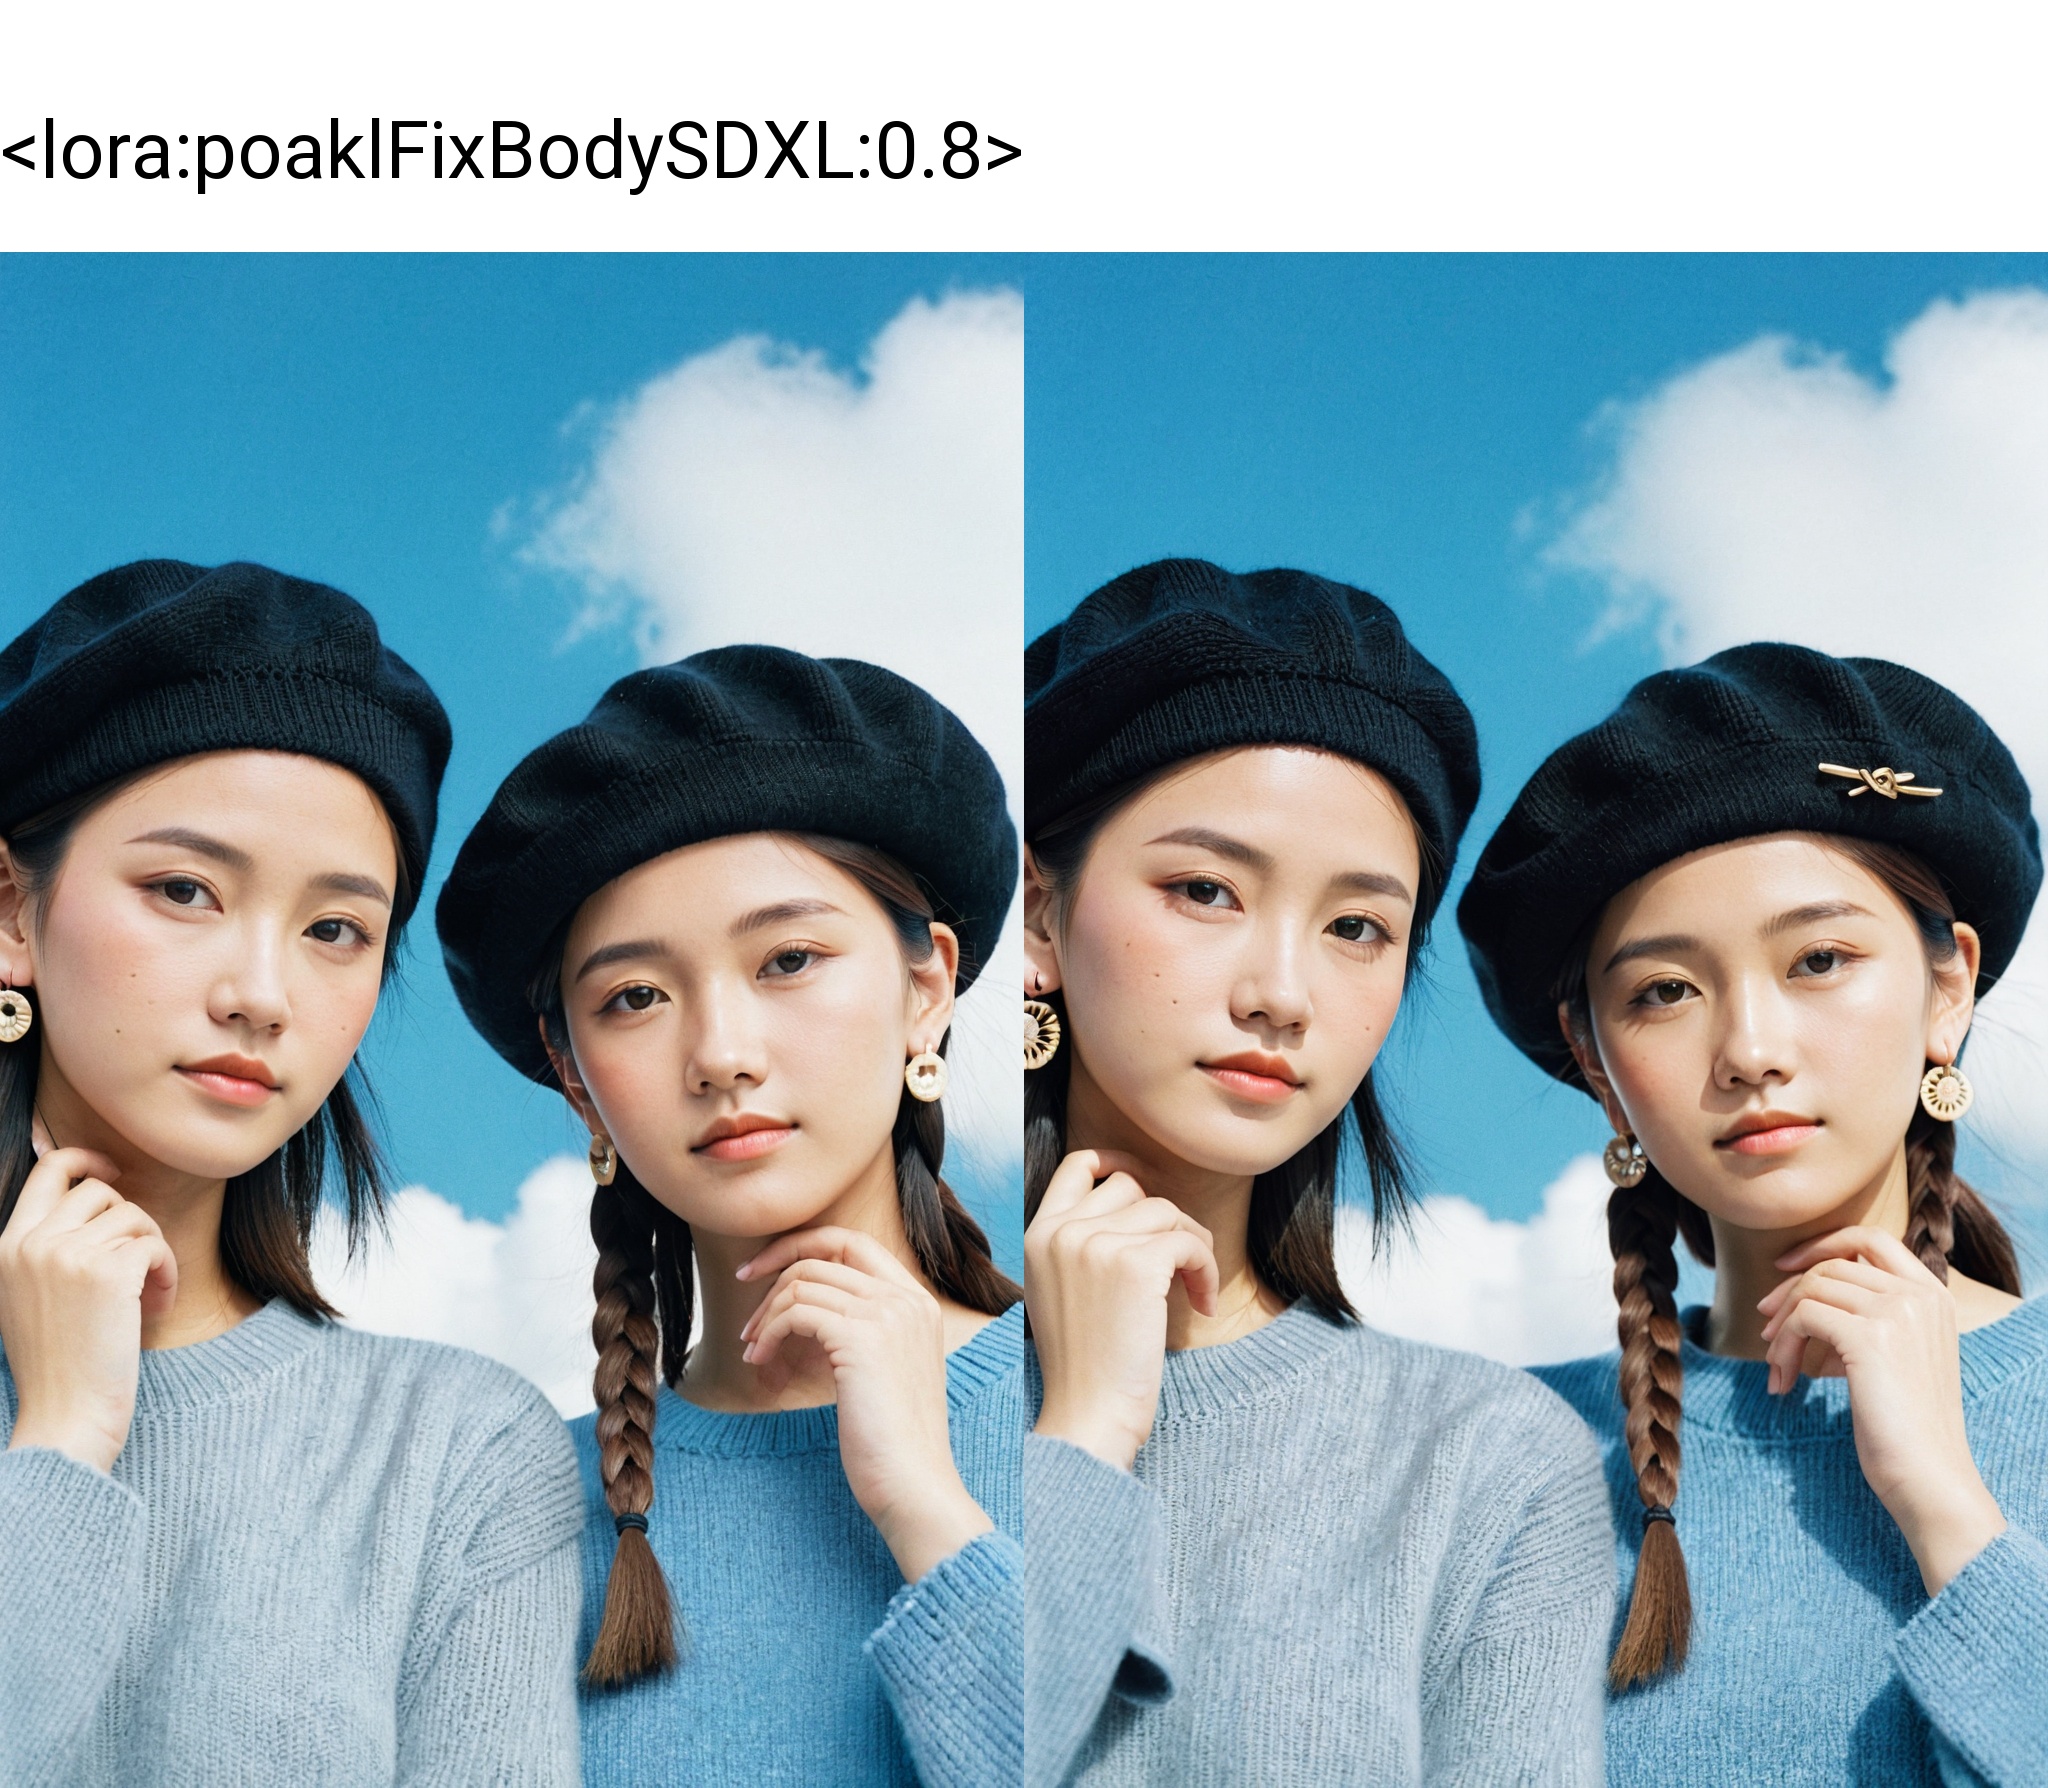 (hands on face:1.3), (film grain),Two young ***** females, East Asian ethnicity, close-up, cloudy blue sky background, casual style, natural daylight, fashion portrait, facing camera, textured sweaters, subtle makeup, serene expressions, black beret hat, braided hair, dangling earrings, interlocking arms pose, film grain, soft focus,((poakl)),<lora:poaklFixBodySDXL:0.8>,